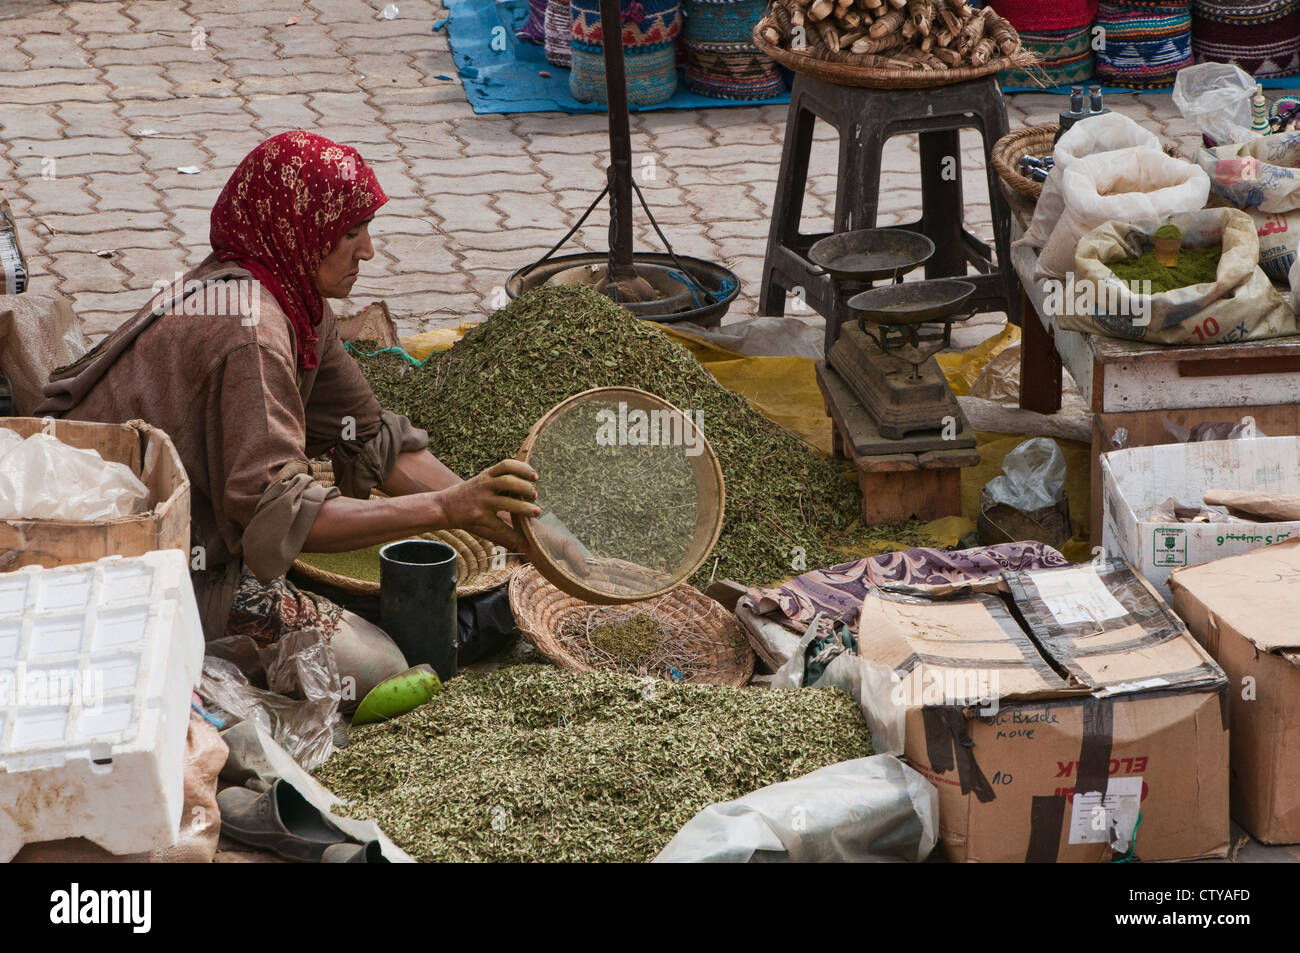 spices for sale in the ancient medina in Marrakech, Morocco Stock Photo